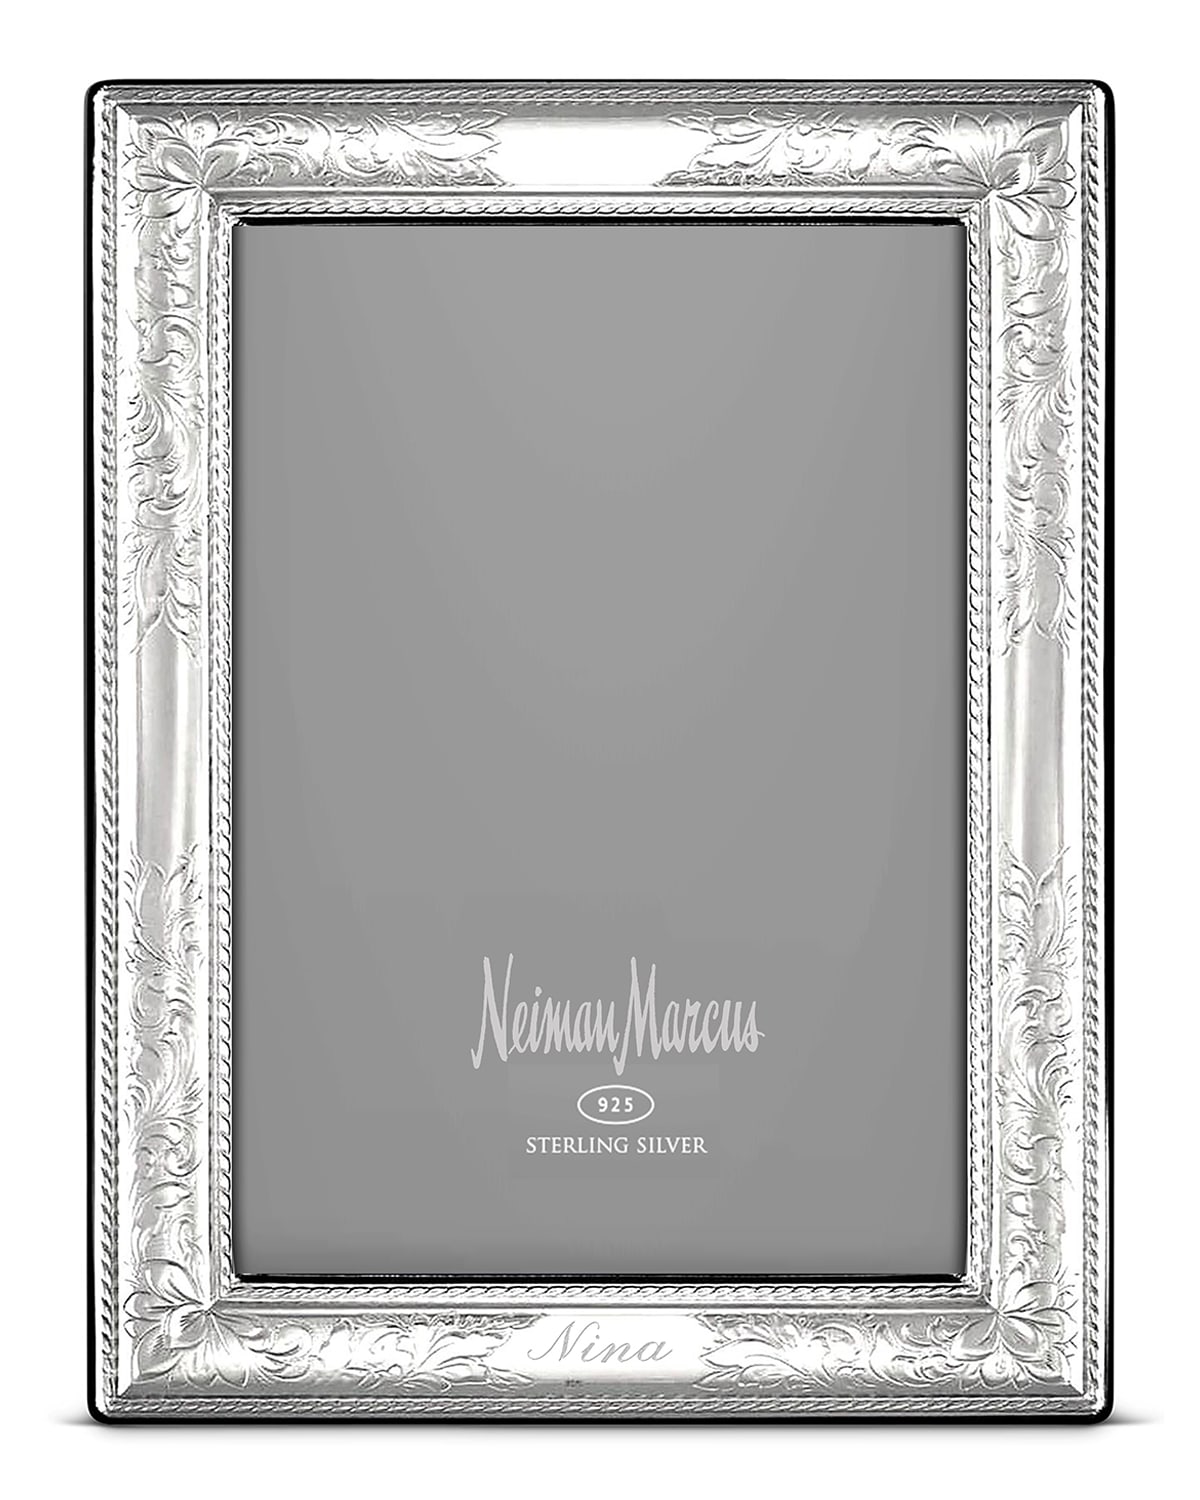 Cunill America Vintage Personalized Frame, 5" X 7" In Metallic